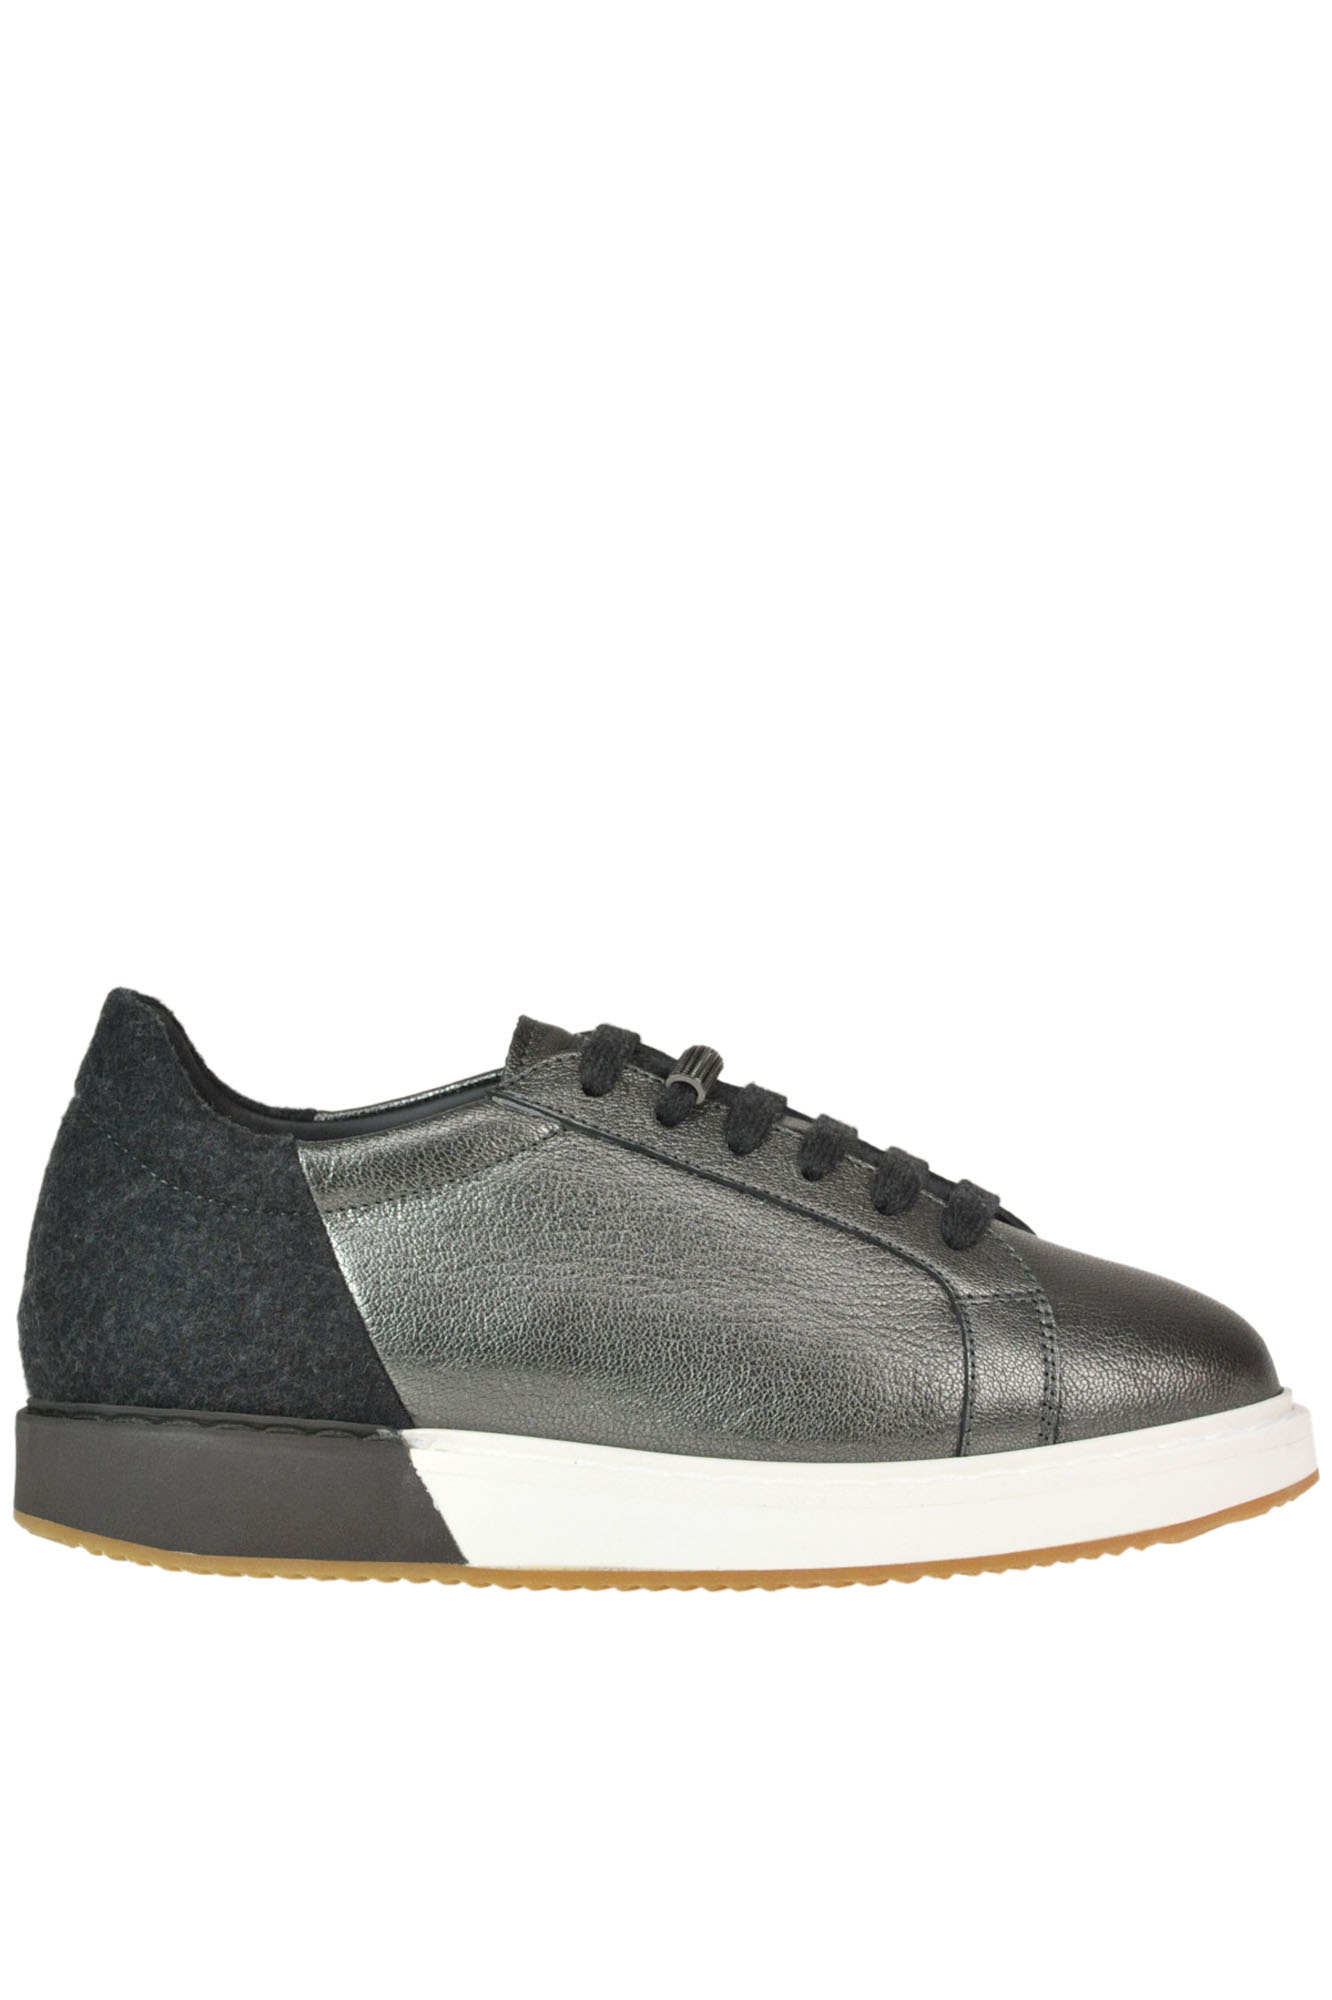 Brunello Cucinelli Metallic Efftect Leather Trainers In Charcoal